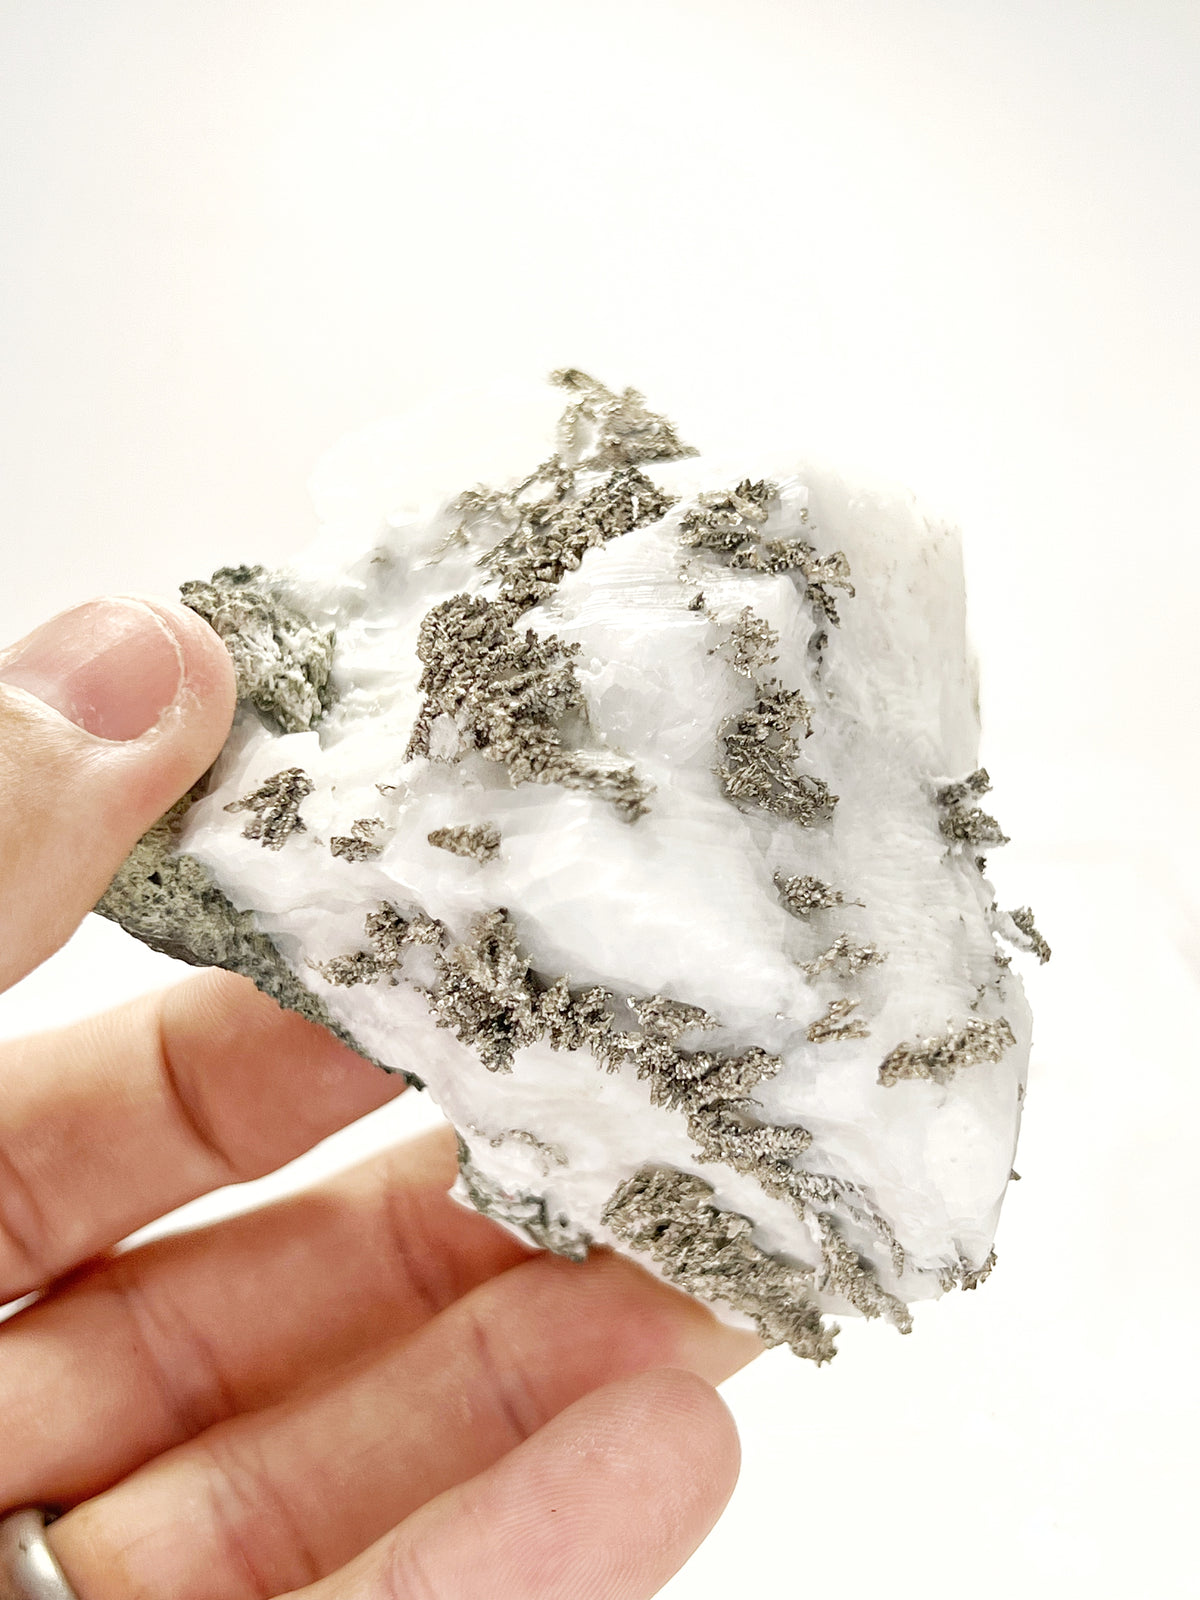 Feathered Silver after Dyscrasite on Calcite